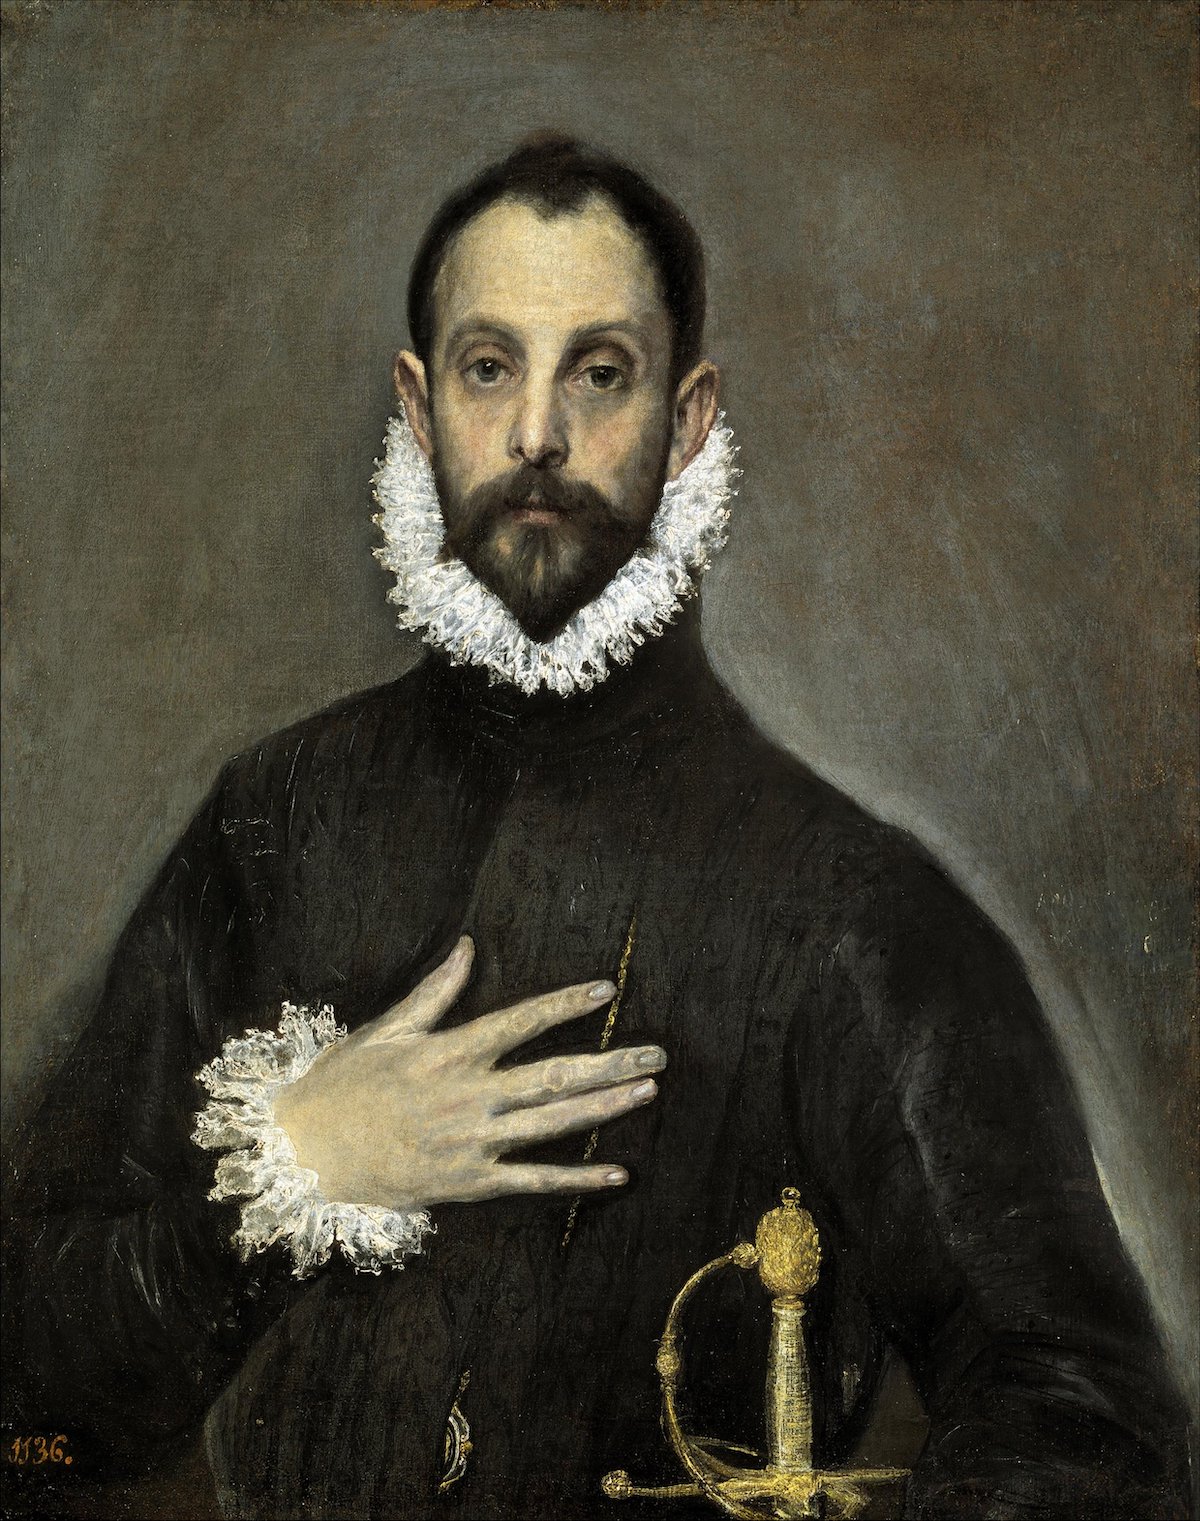 Oil on canvas El Greco portrait of a 16th century nobleman with his hand on his chest.